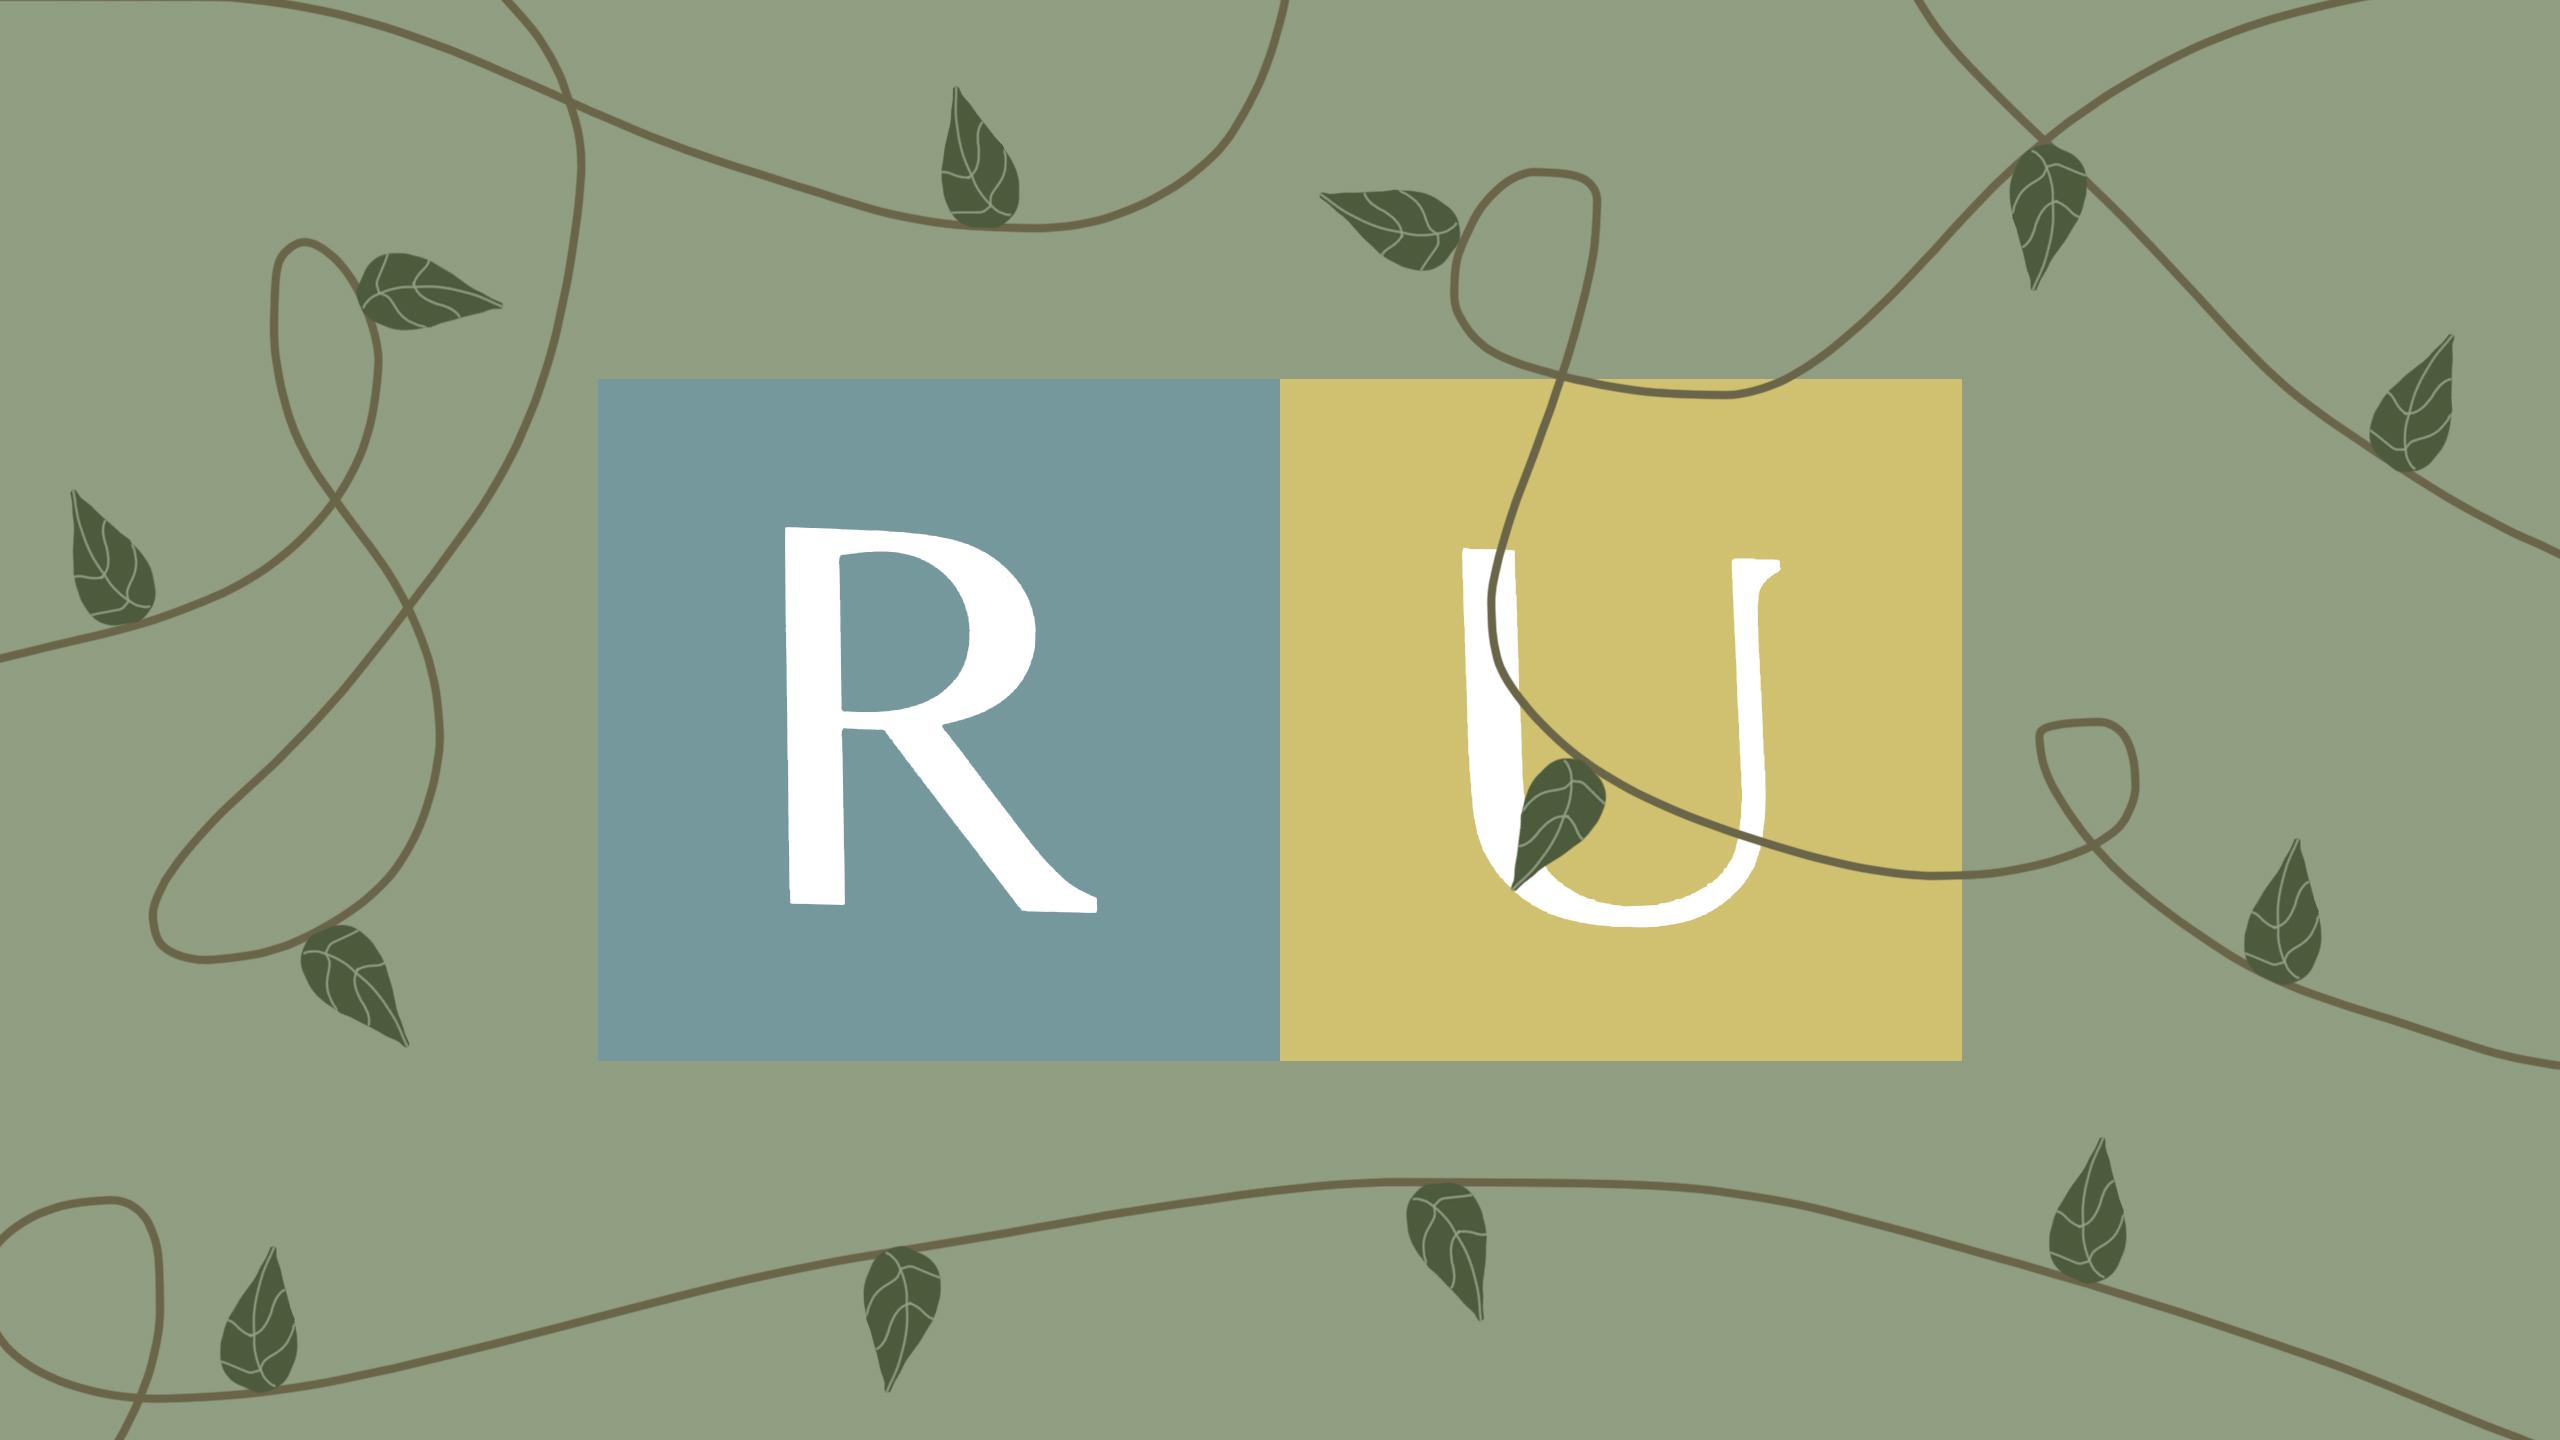 The 'RU' Ryerson logo but in more earth tones and with vines swirling around the photo